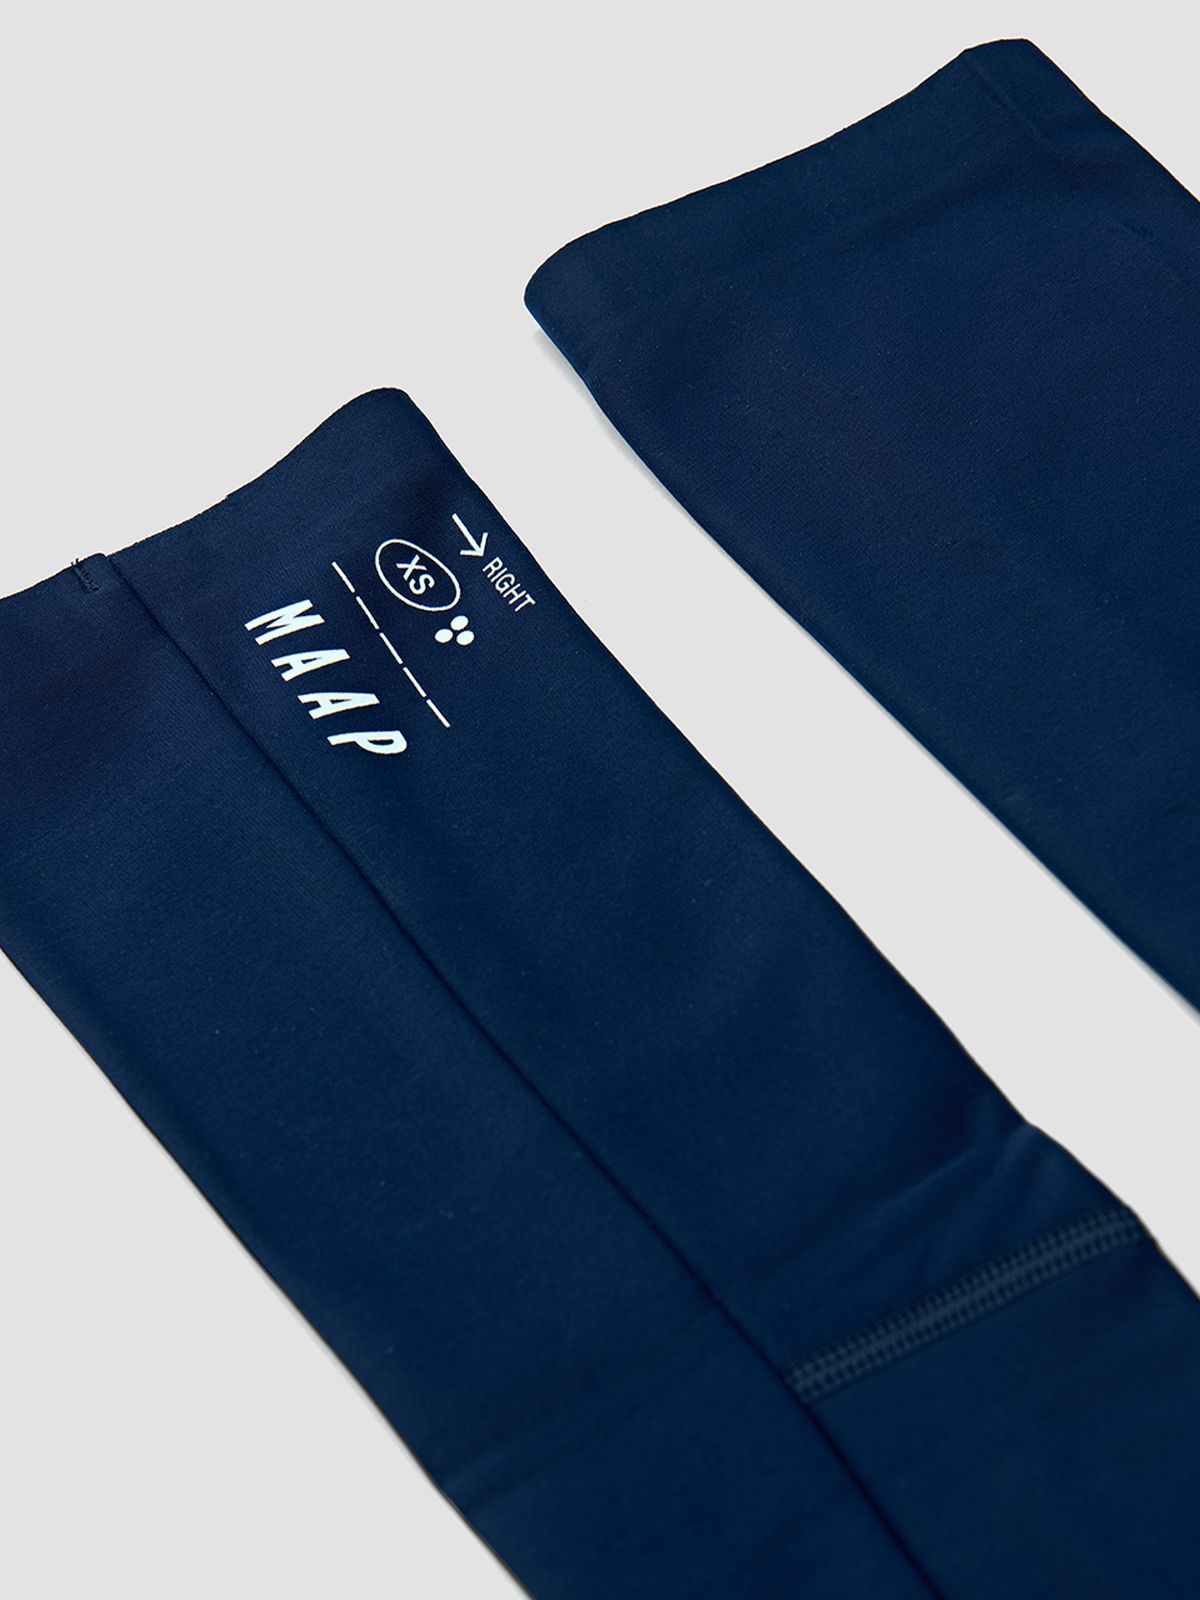 Arm Warmers (Navy)